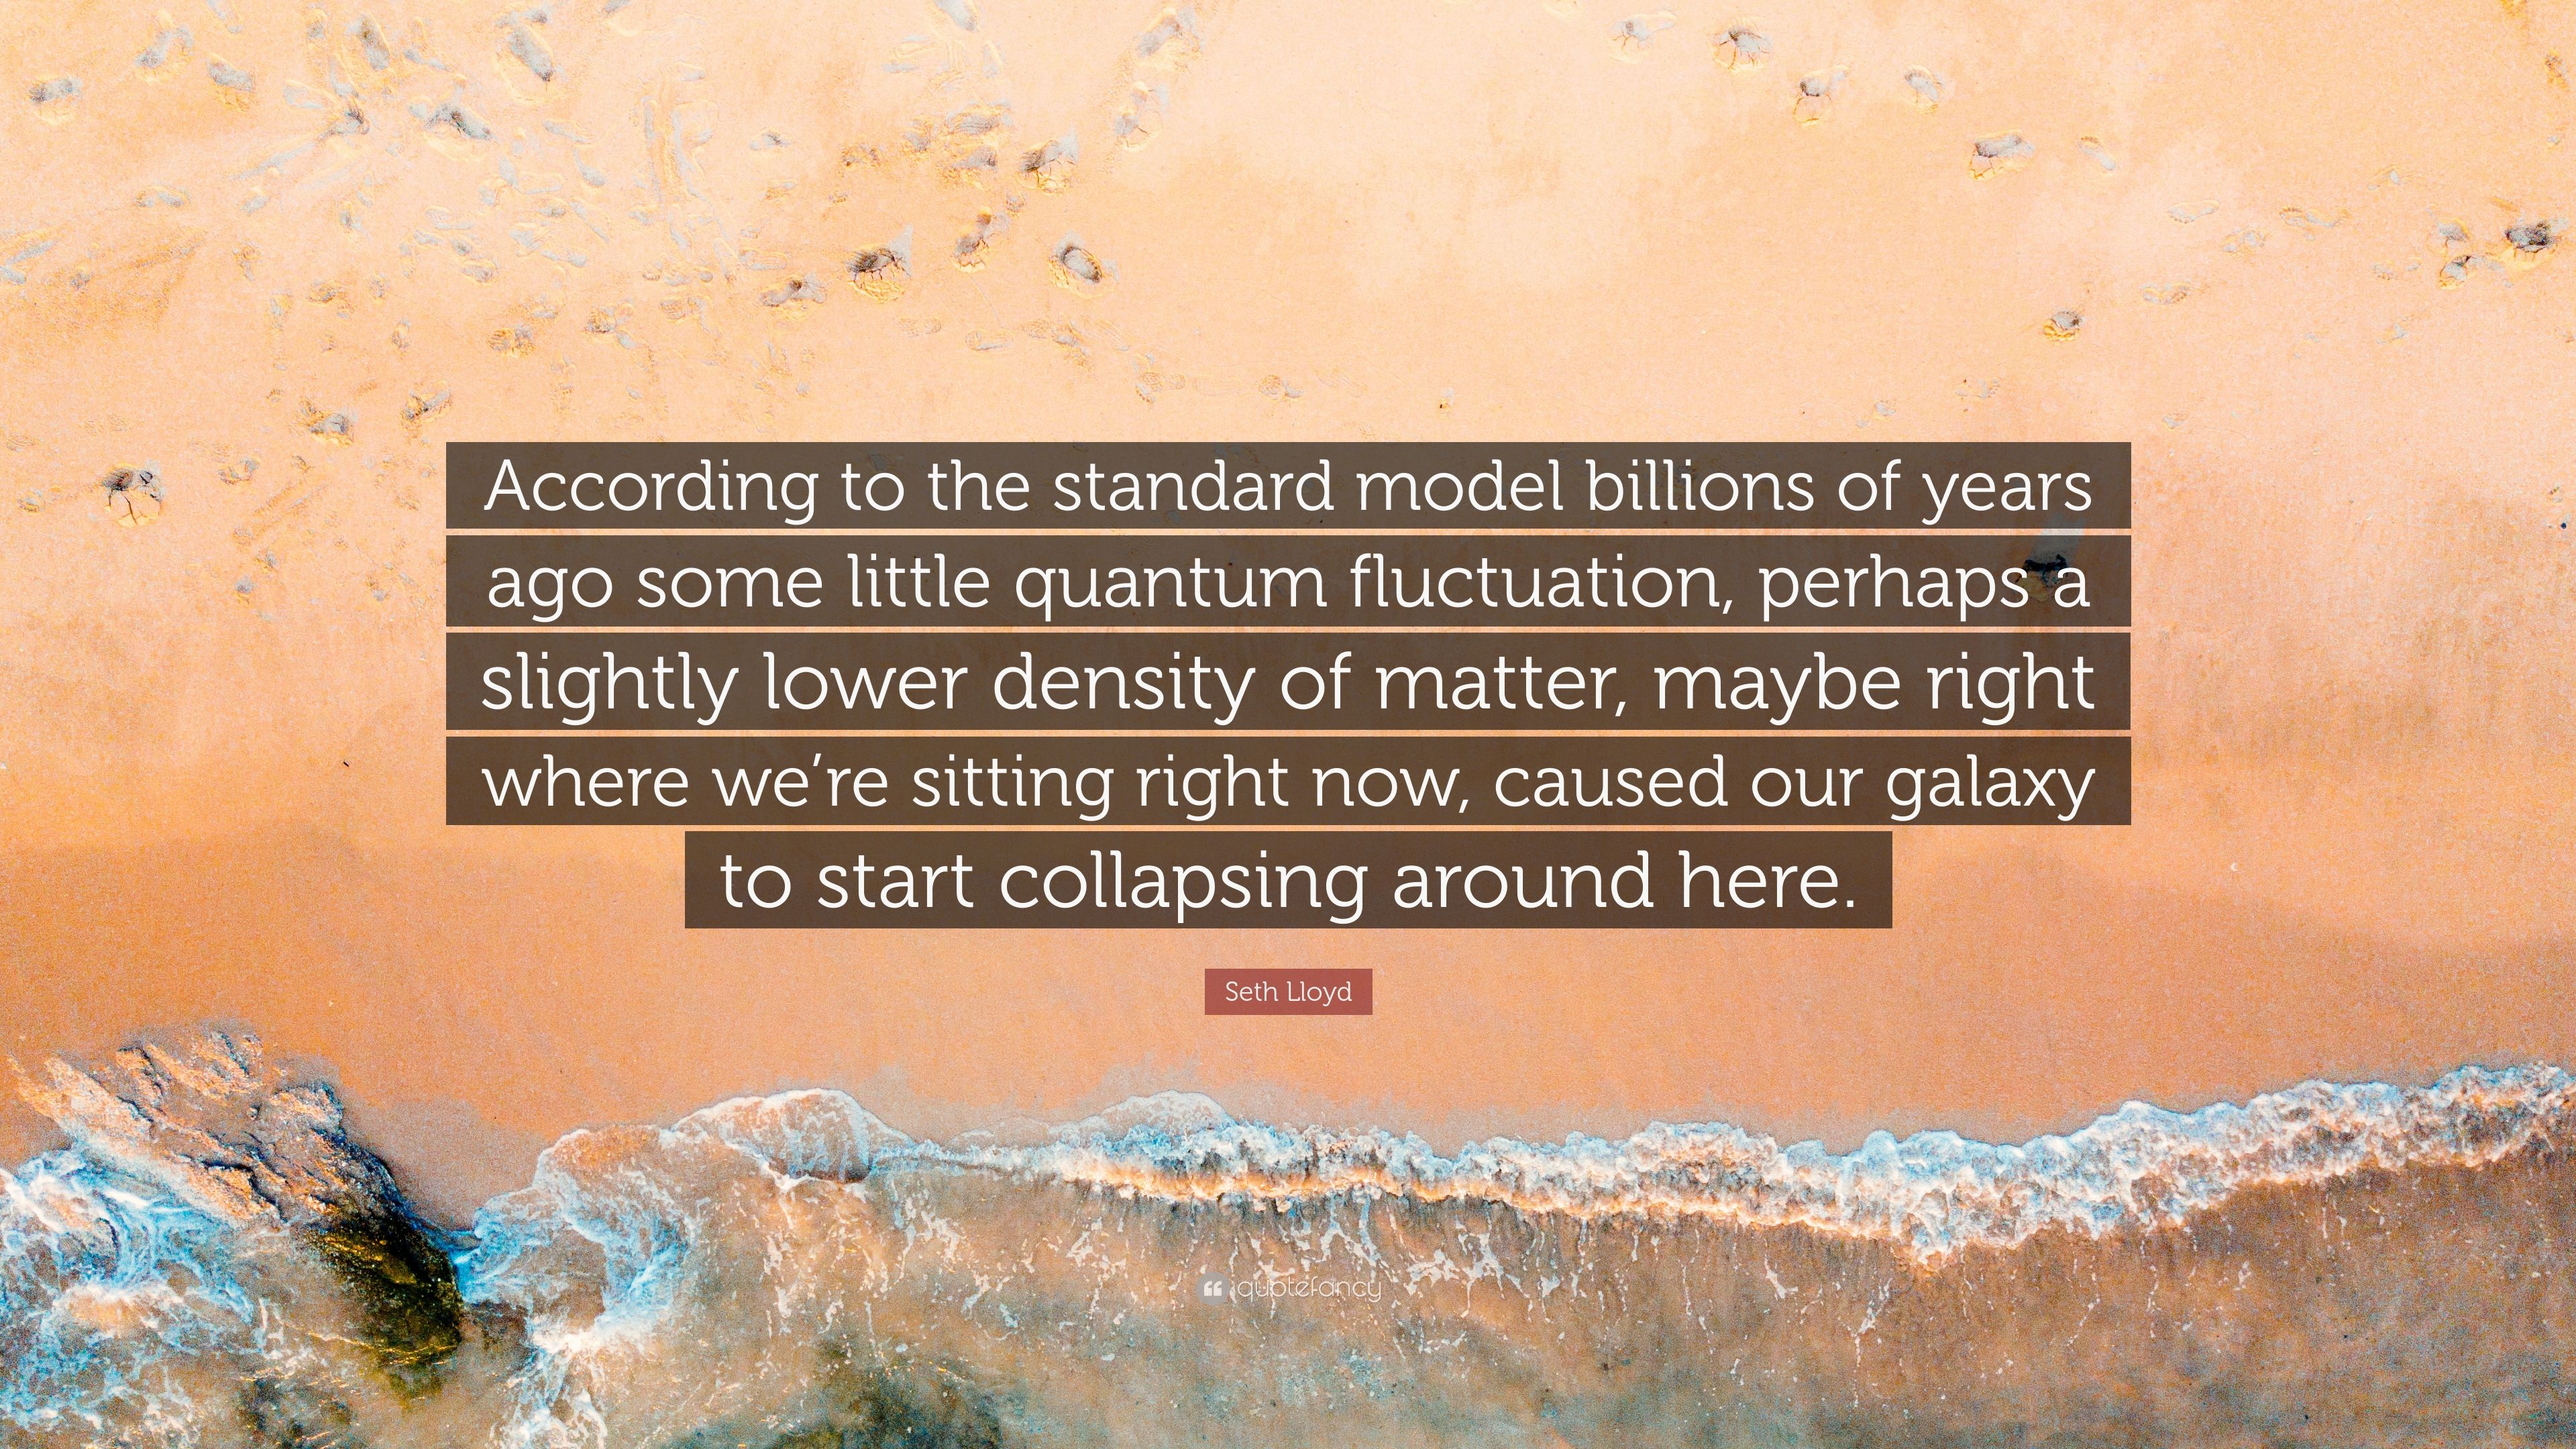 Seth Lloyd Quote: “According to the standard model billions of years